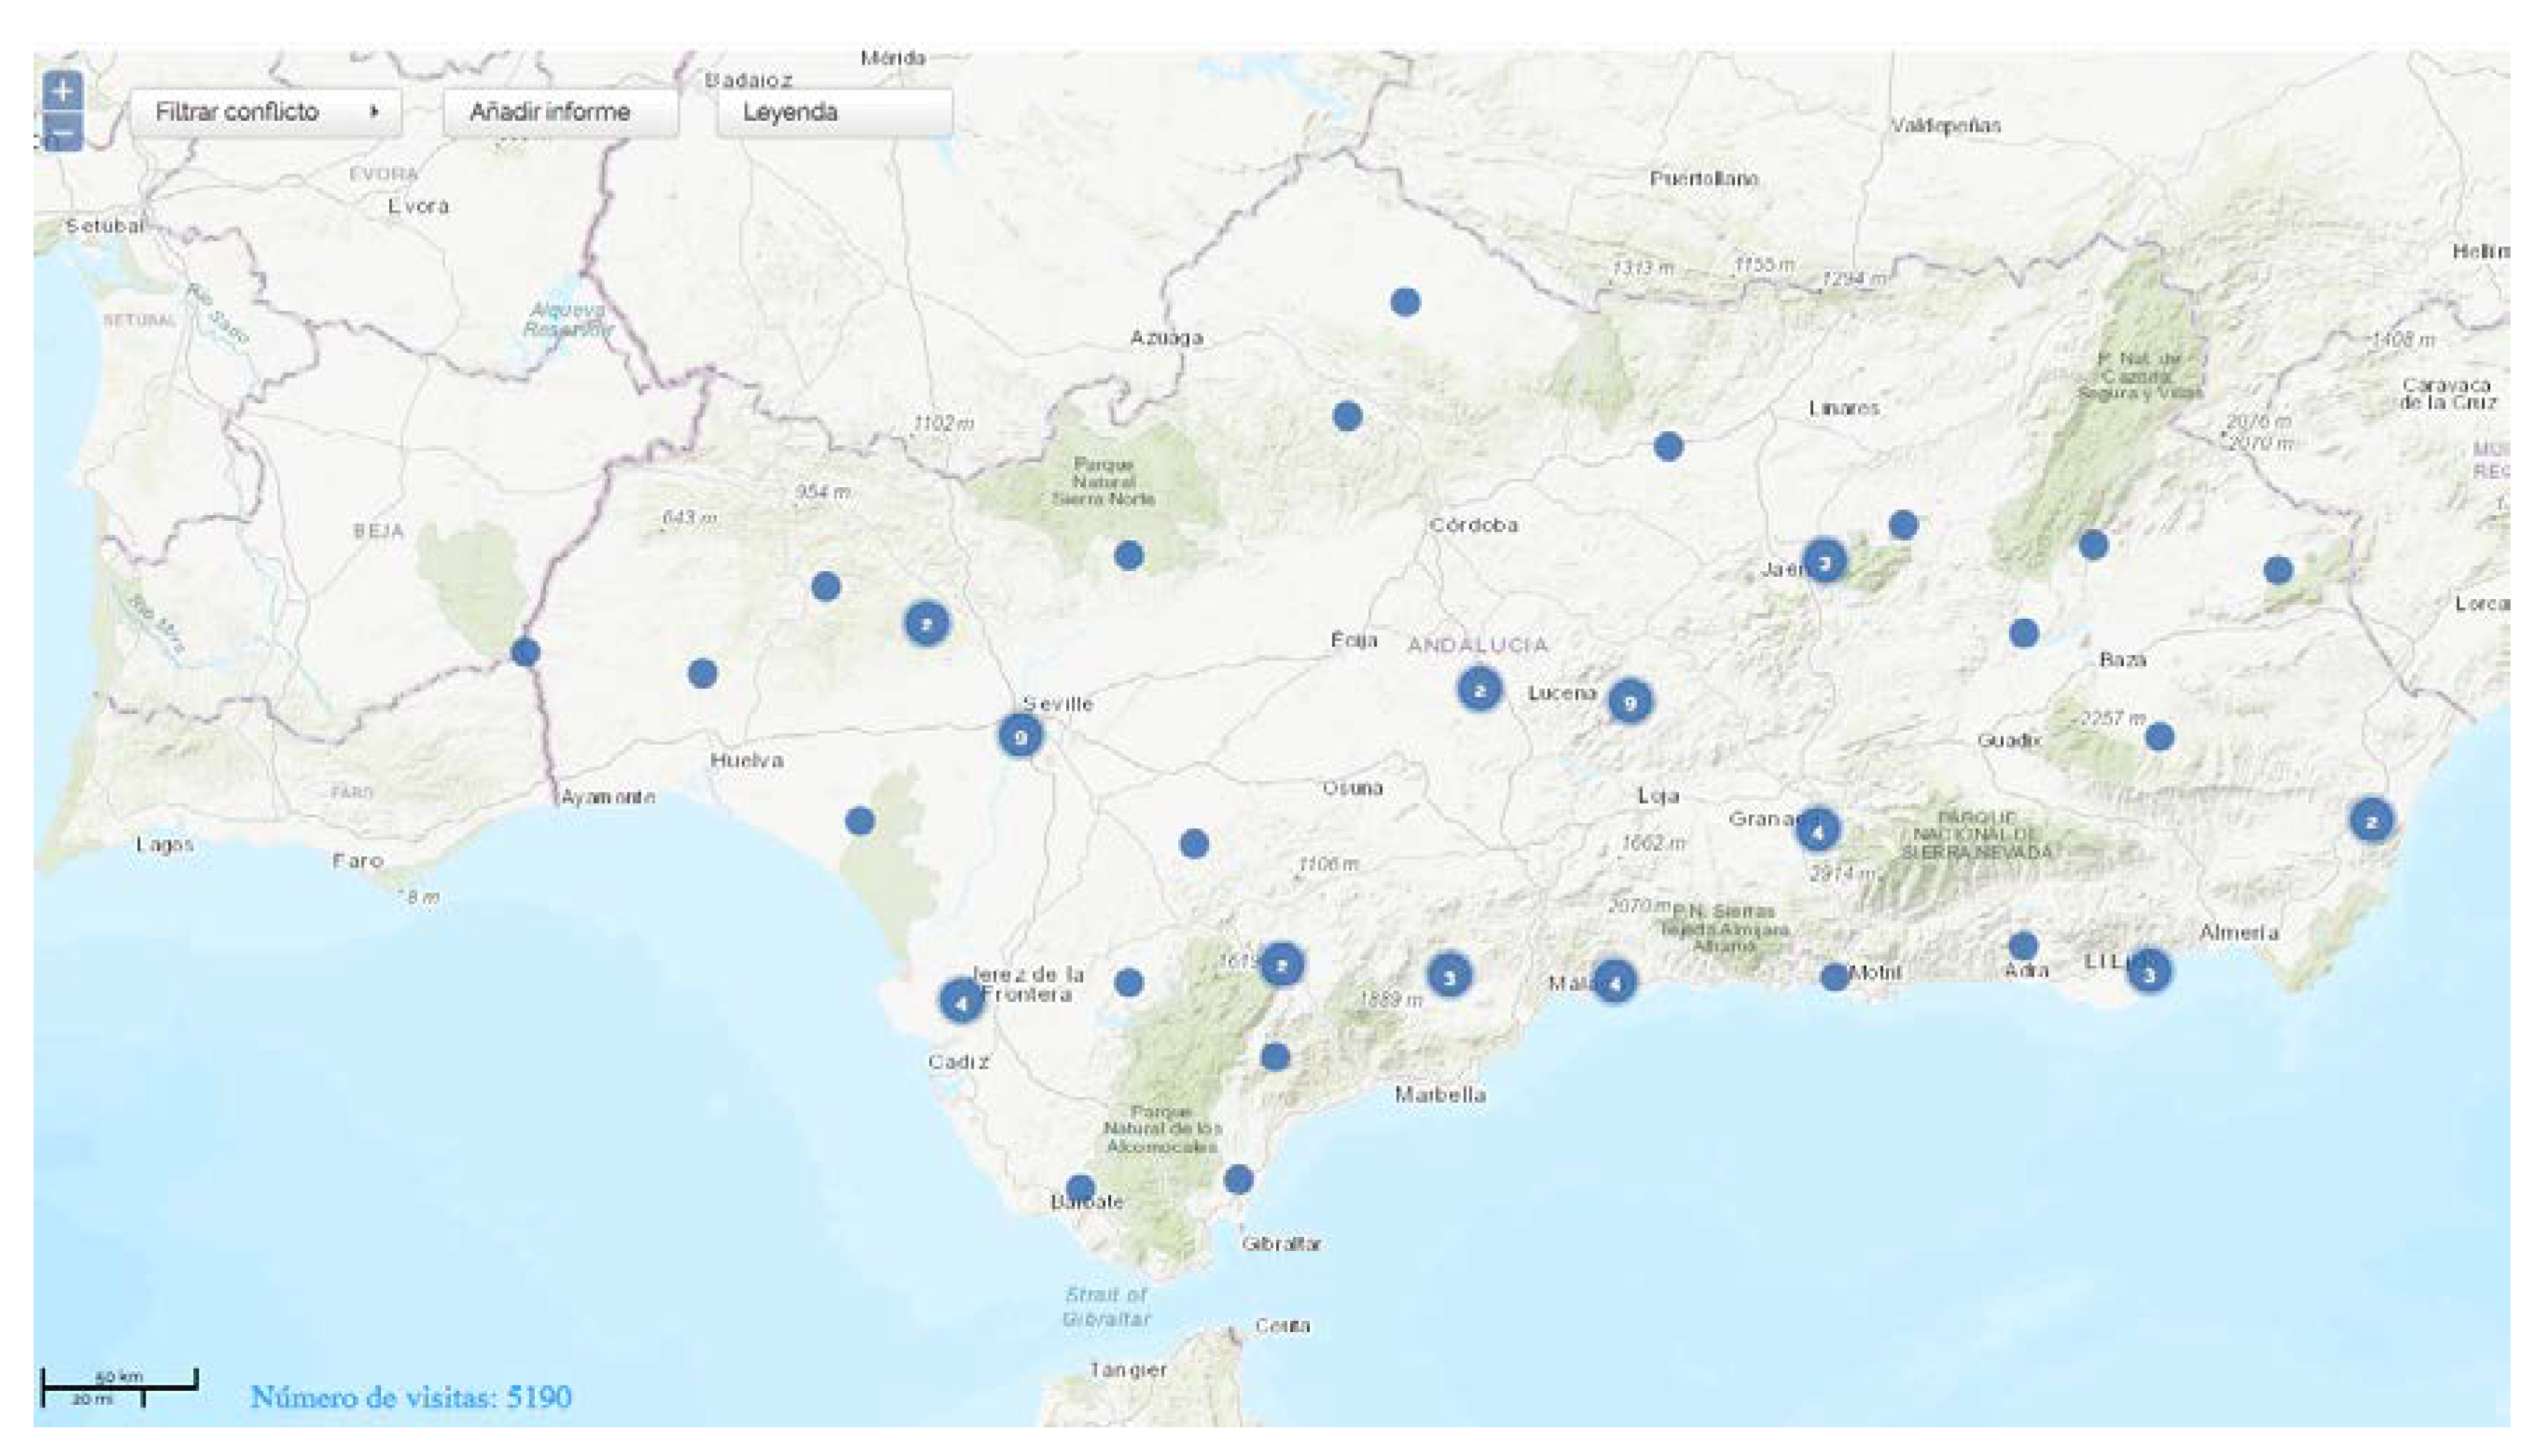 IJGI | Free Full-Text | Promoting Environmental Justice through Integrated  Mapping Approaches: The Map of Water Conflicts in Andalusia (Spain) | HTML